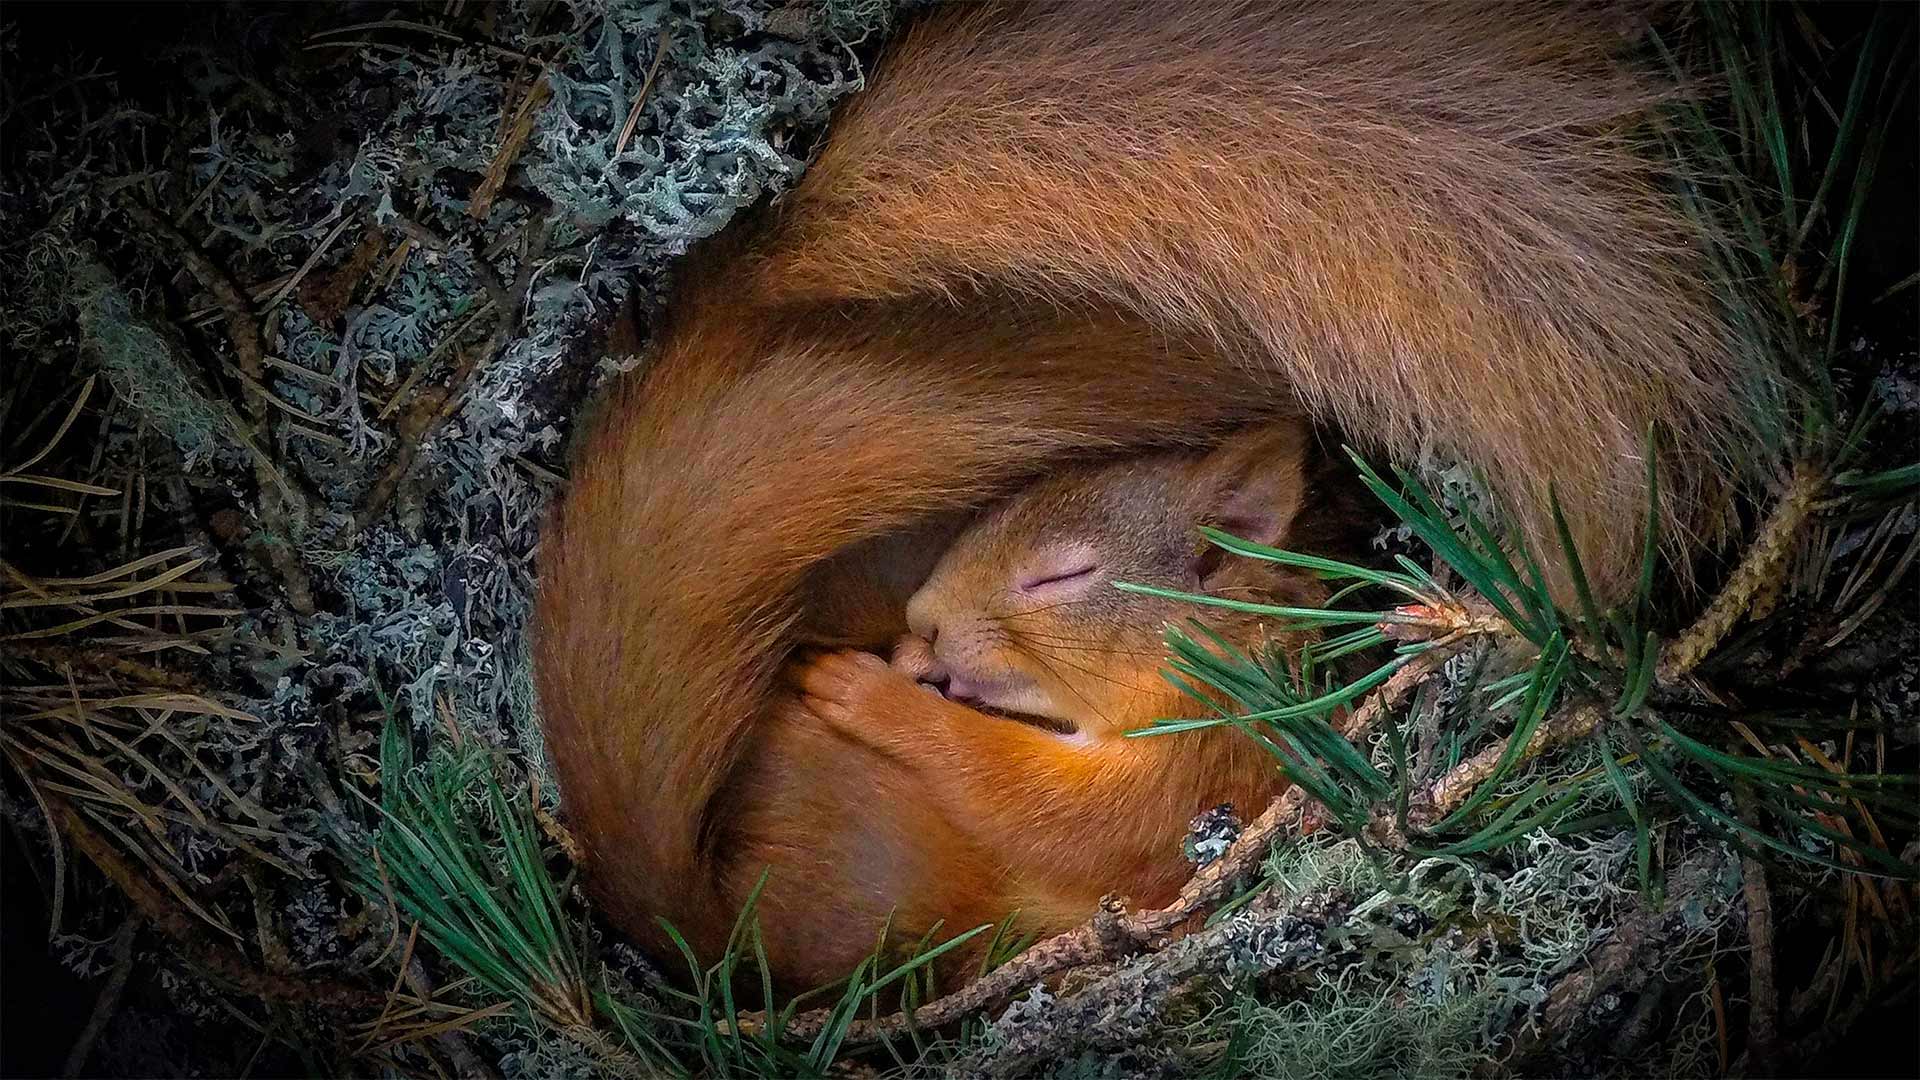 Red squirrel in a nest of lichen and pine needles, Scottish Highlands - Neil Anderson